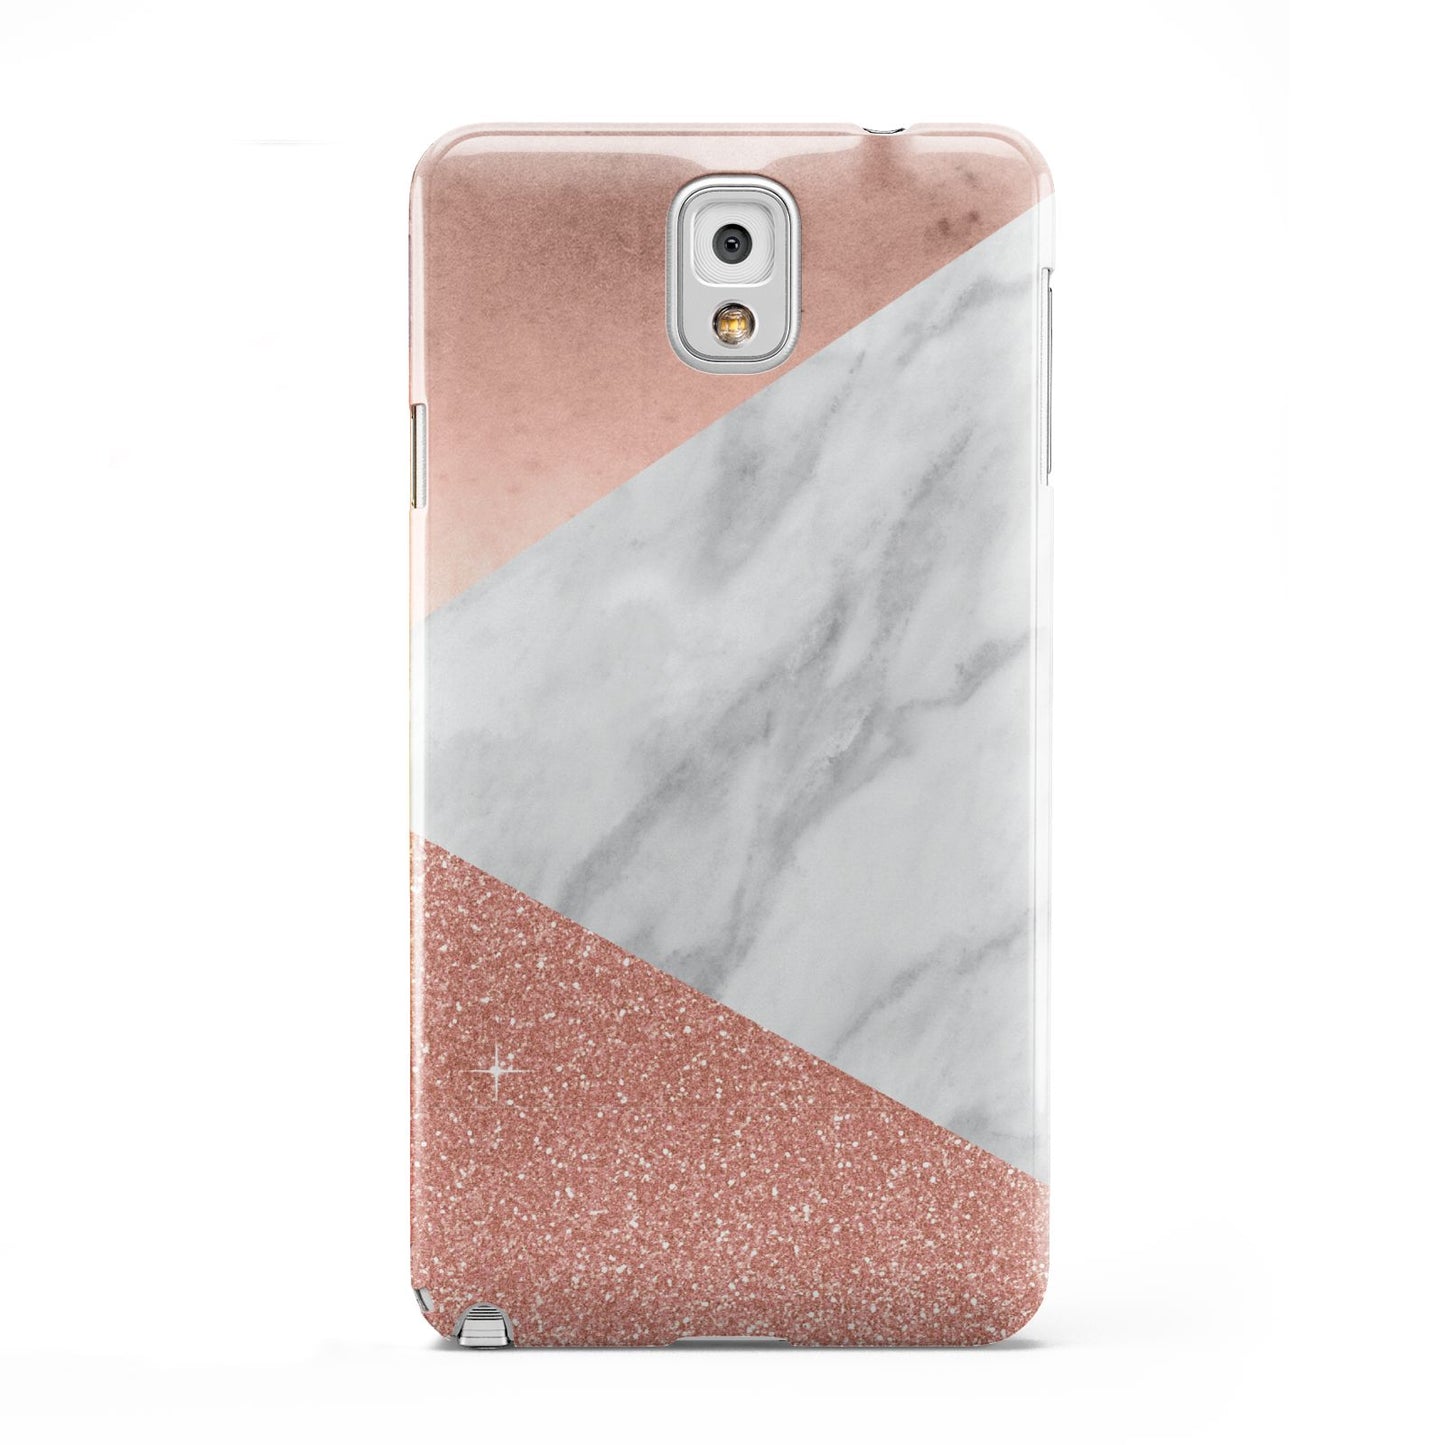 Marble Rose Gold Foil Samsung Galaxy Note 3 Case